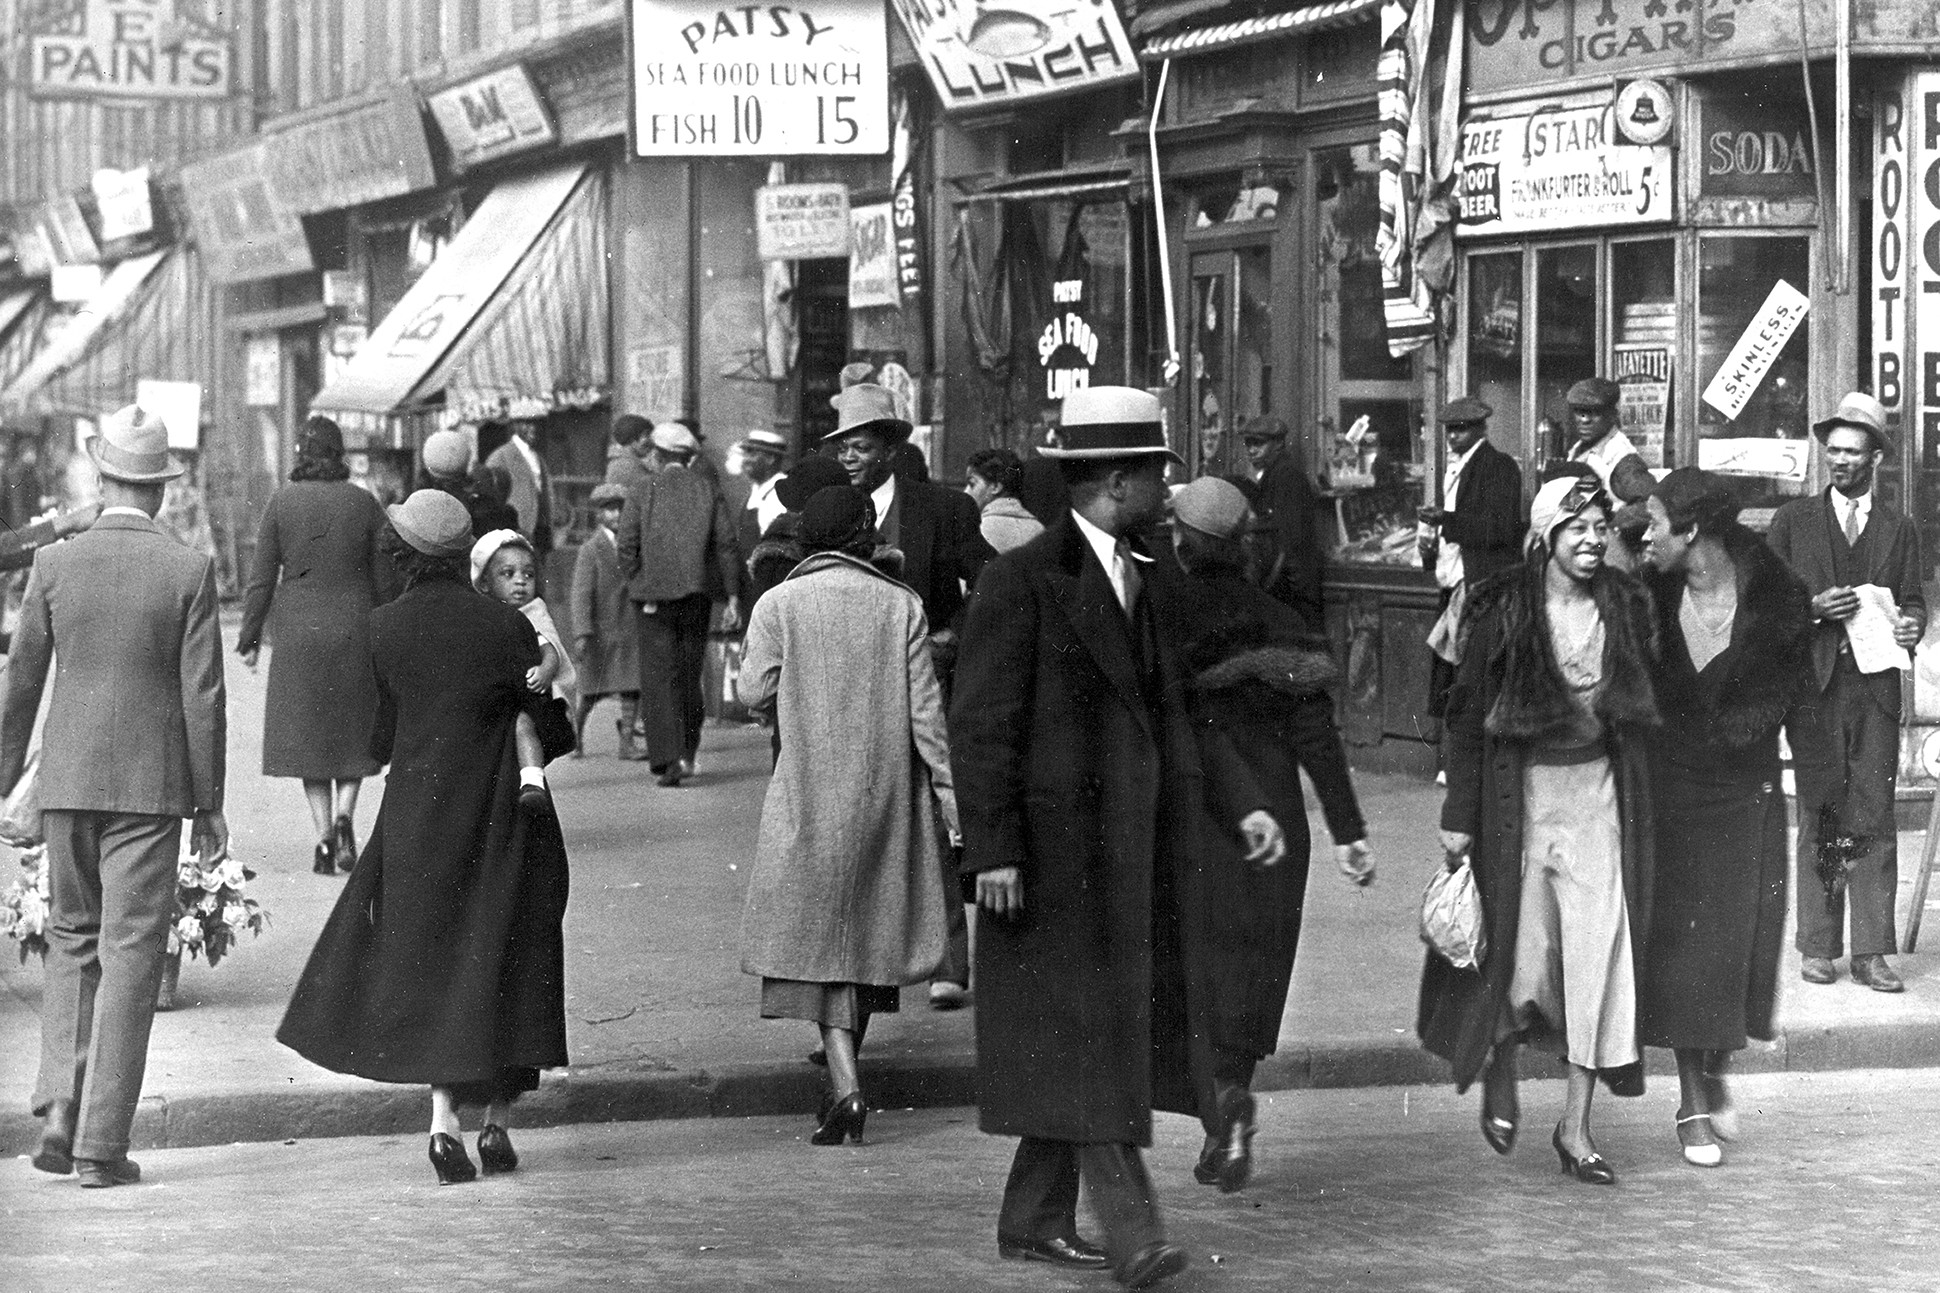 Black and white image of a street scene in Harlem in the 1930s.